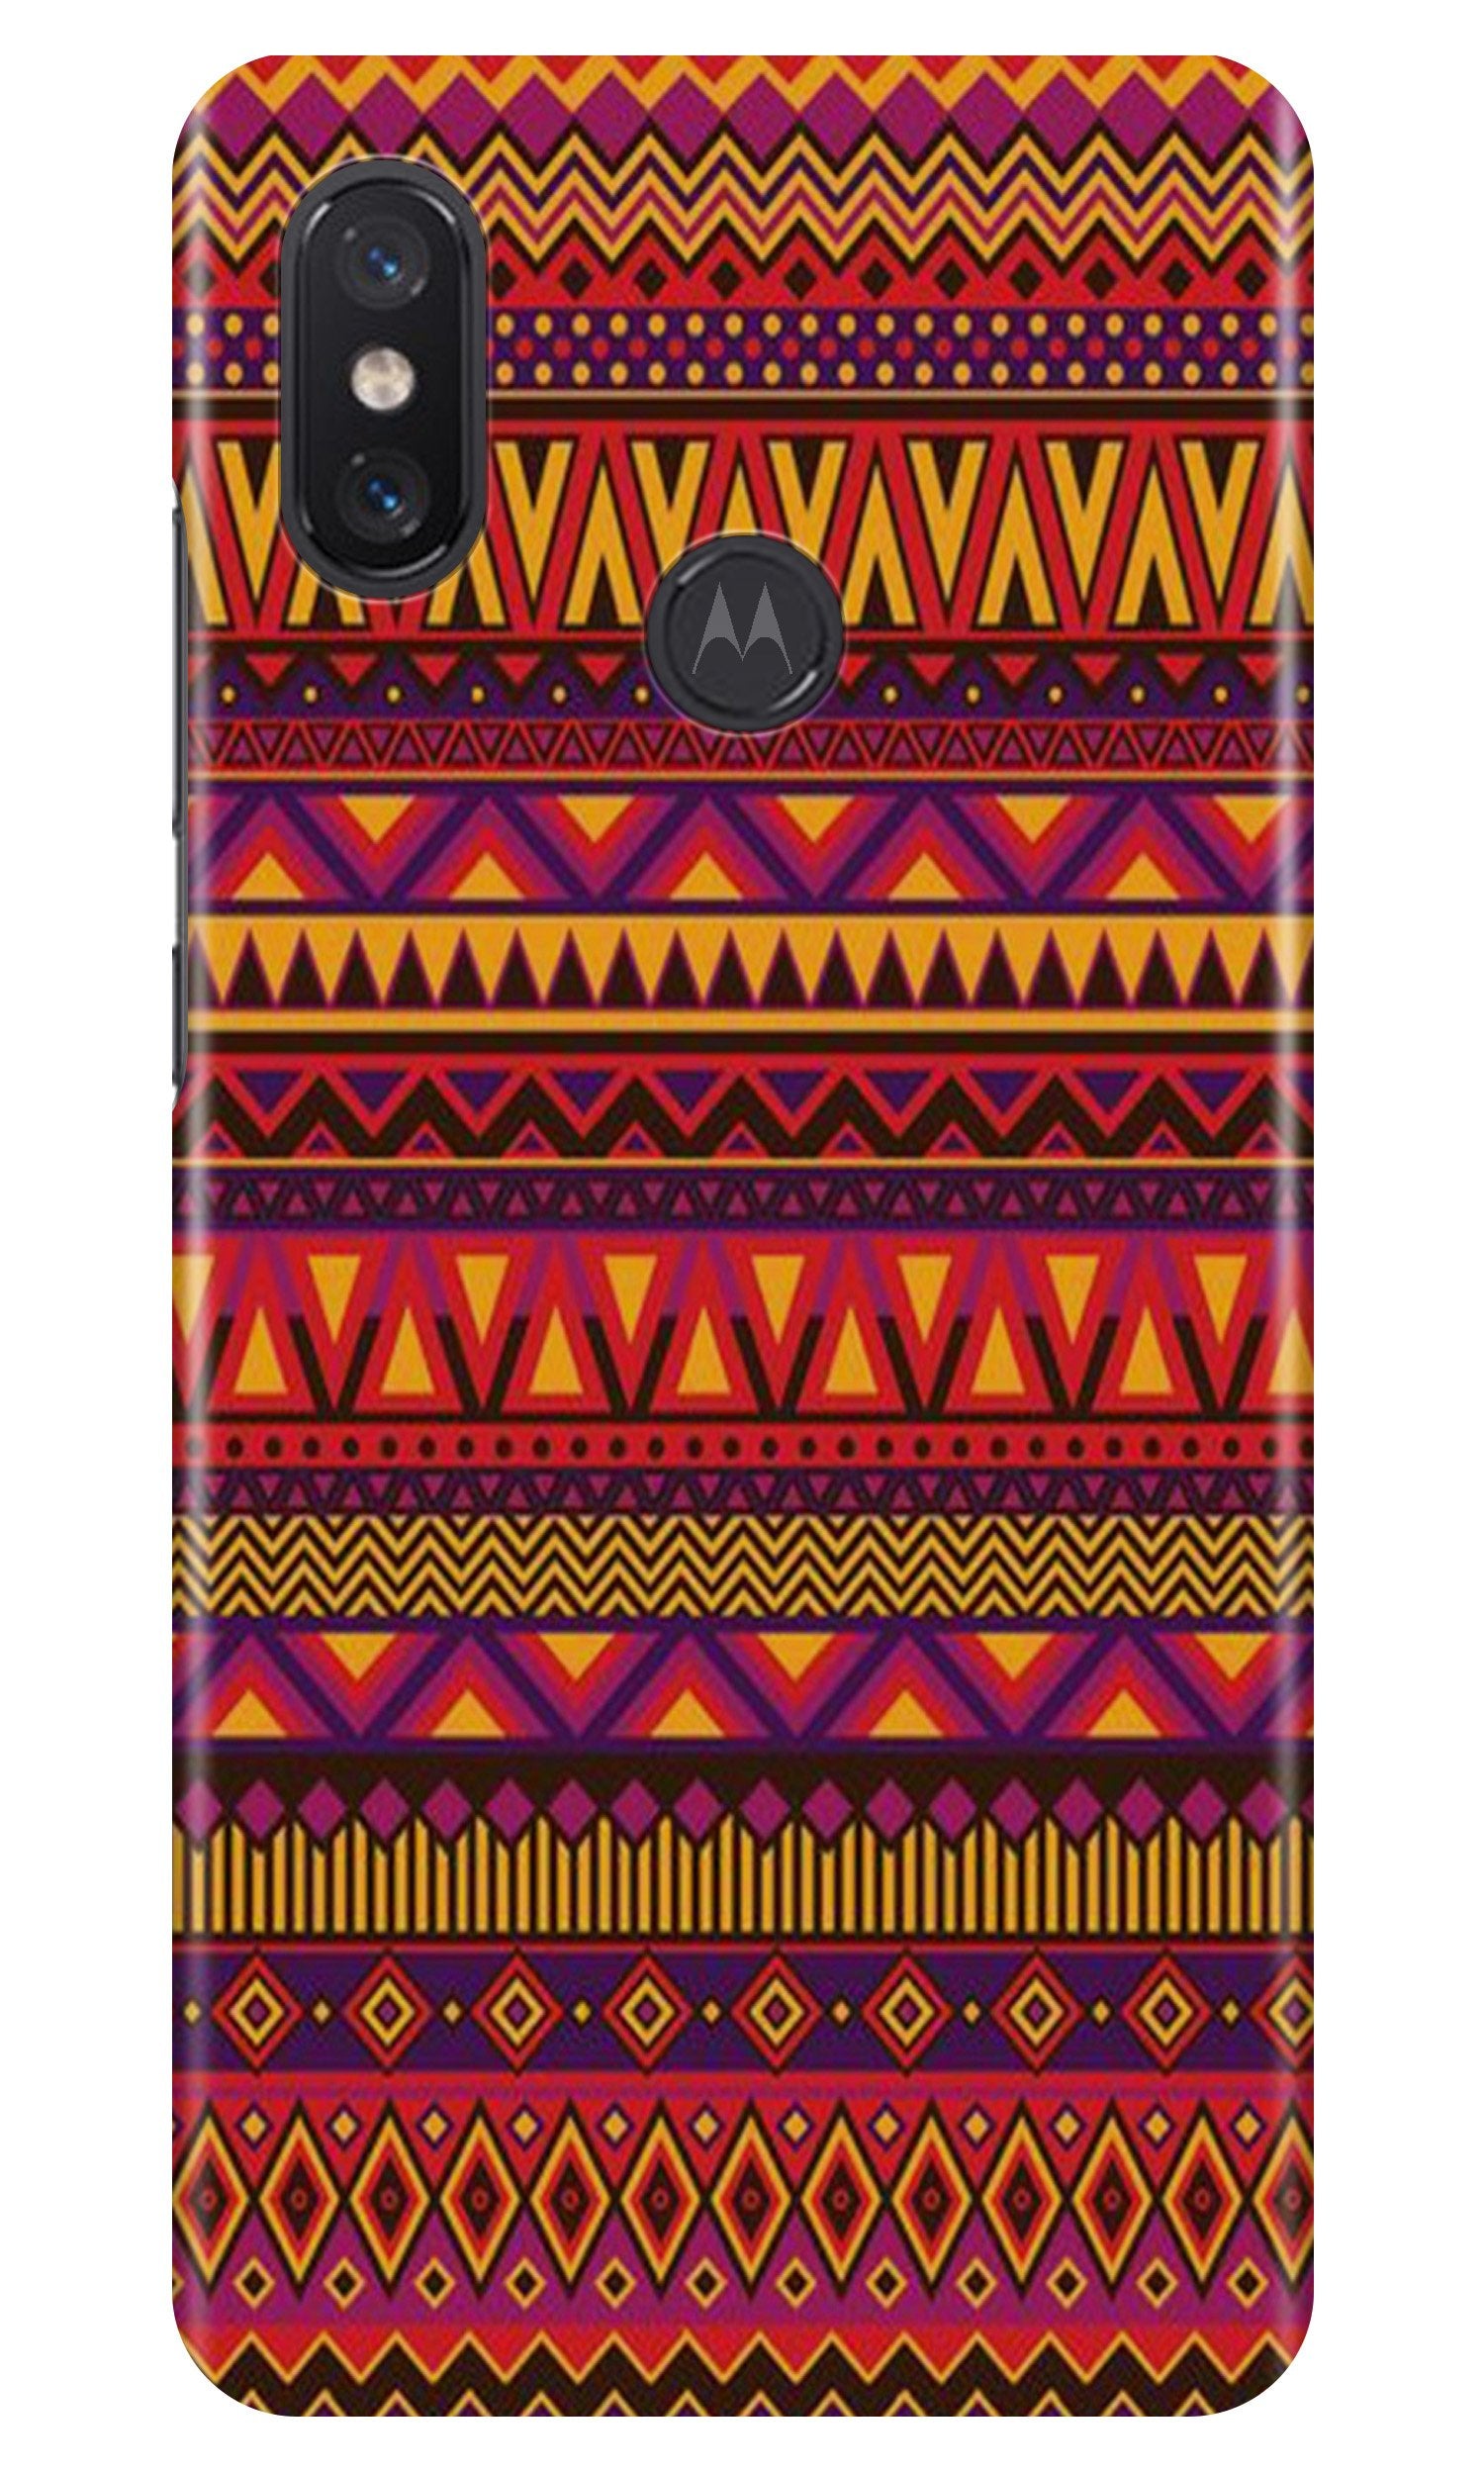 Zigzag line pattern2 Case for Moto One Power